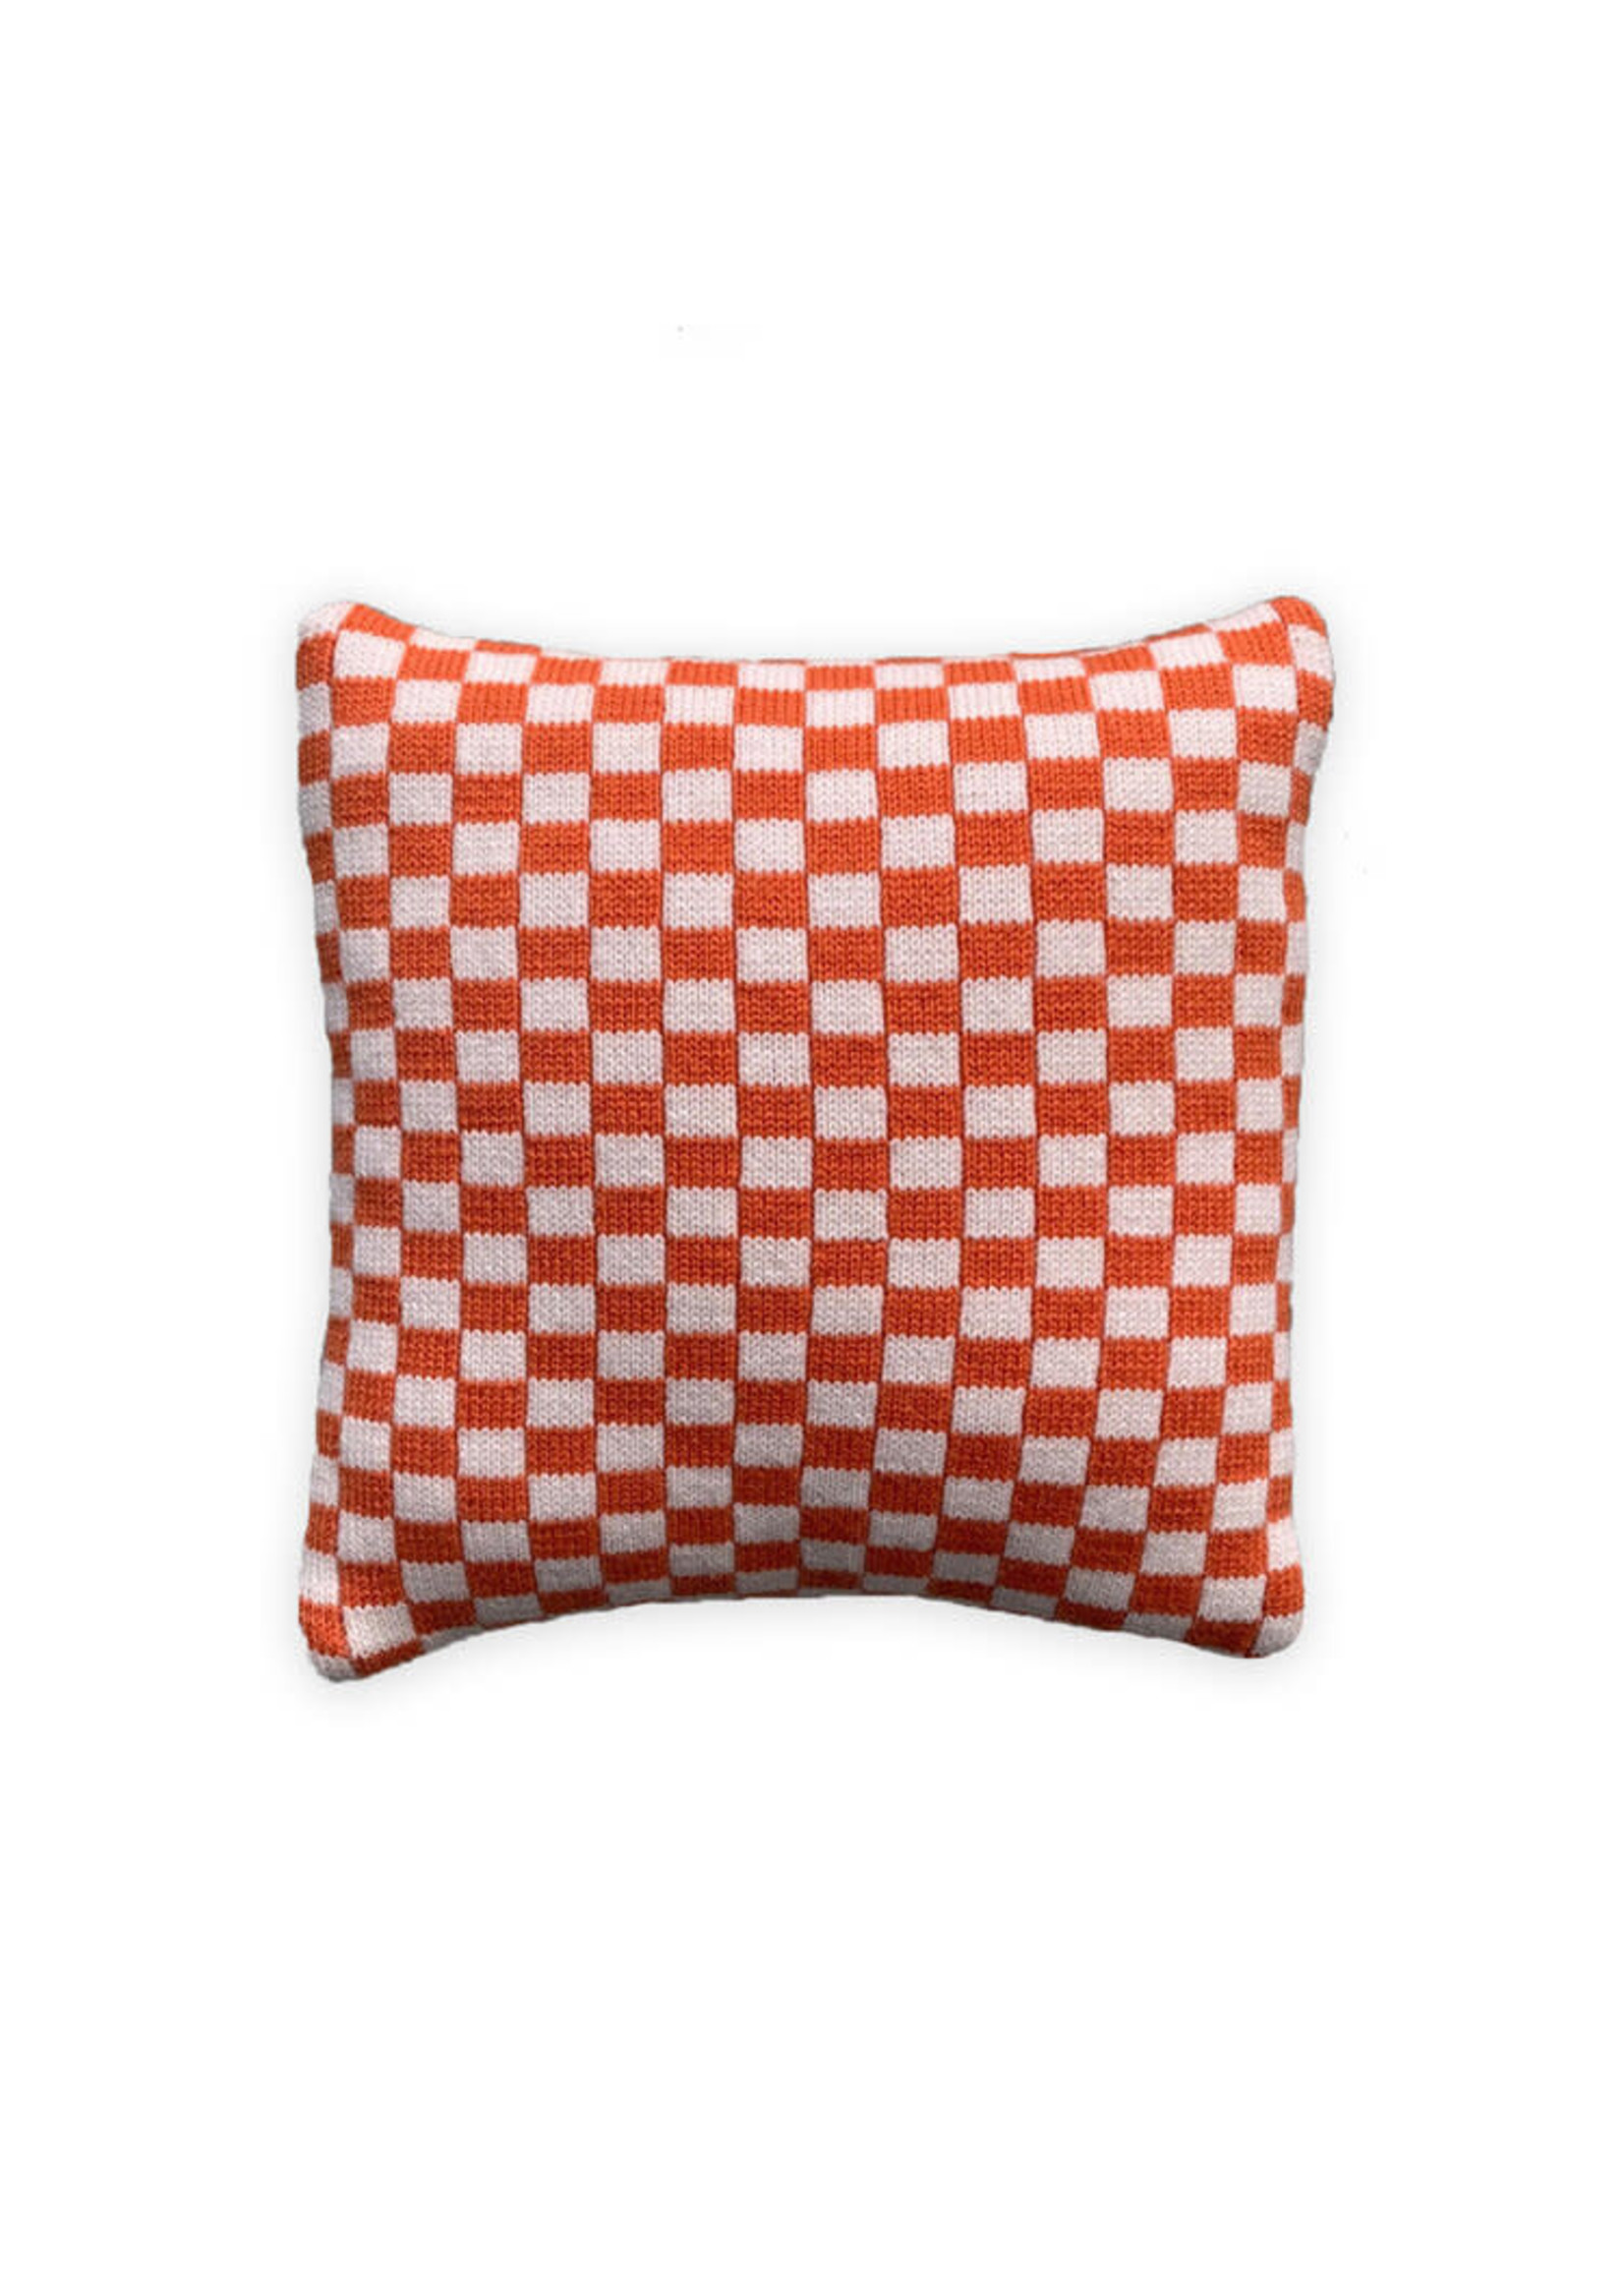 Goods of May Sidney cushion in orange - small 30 x 30cm